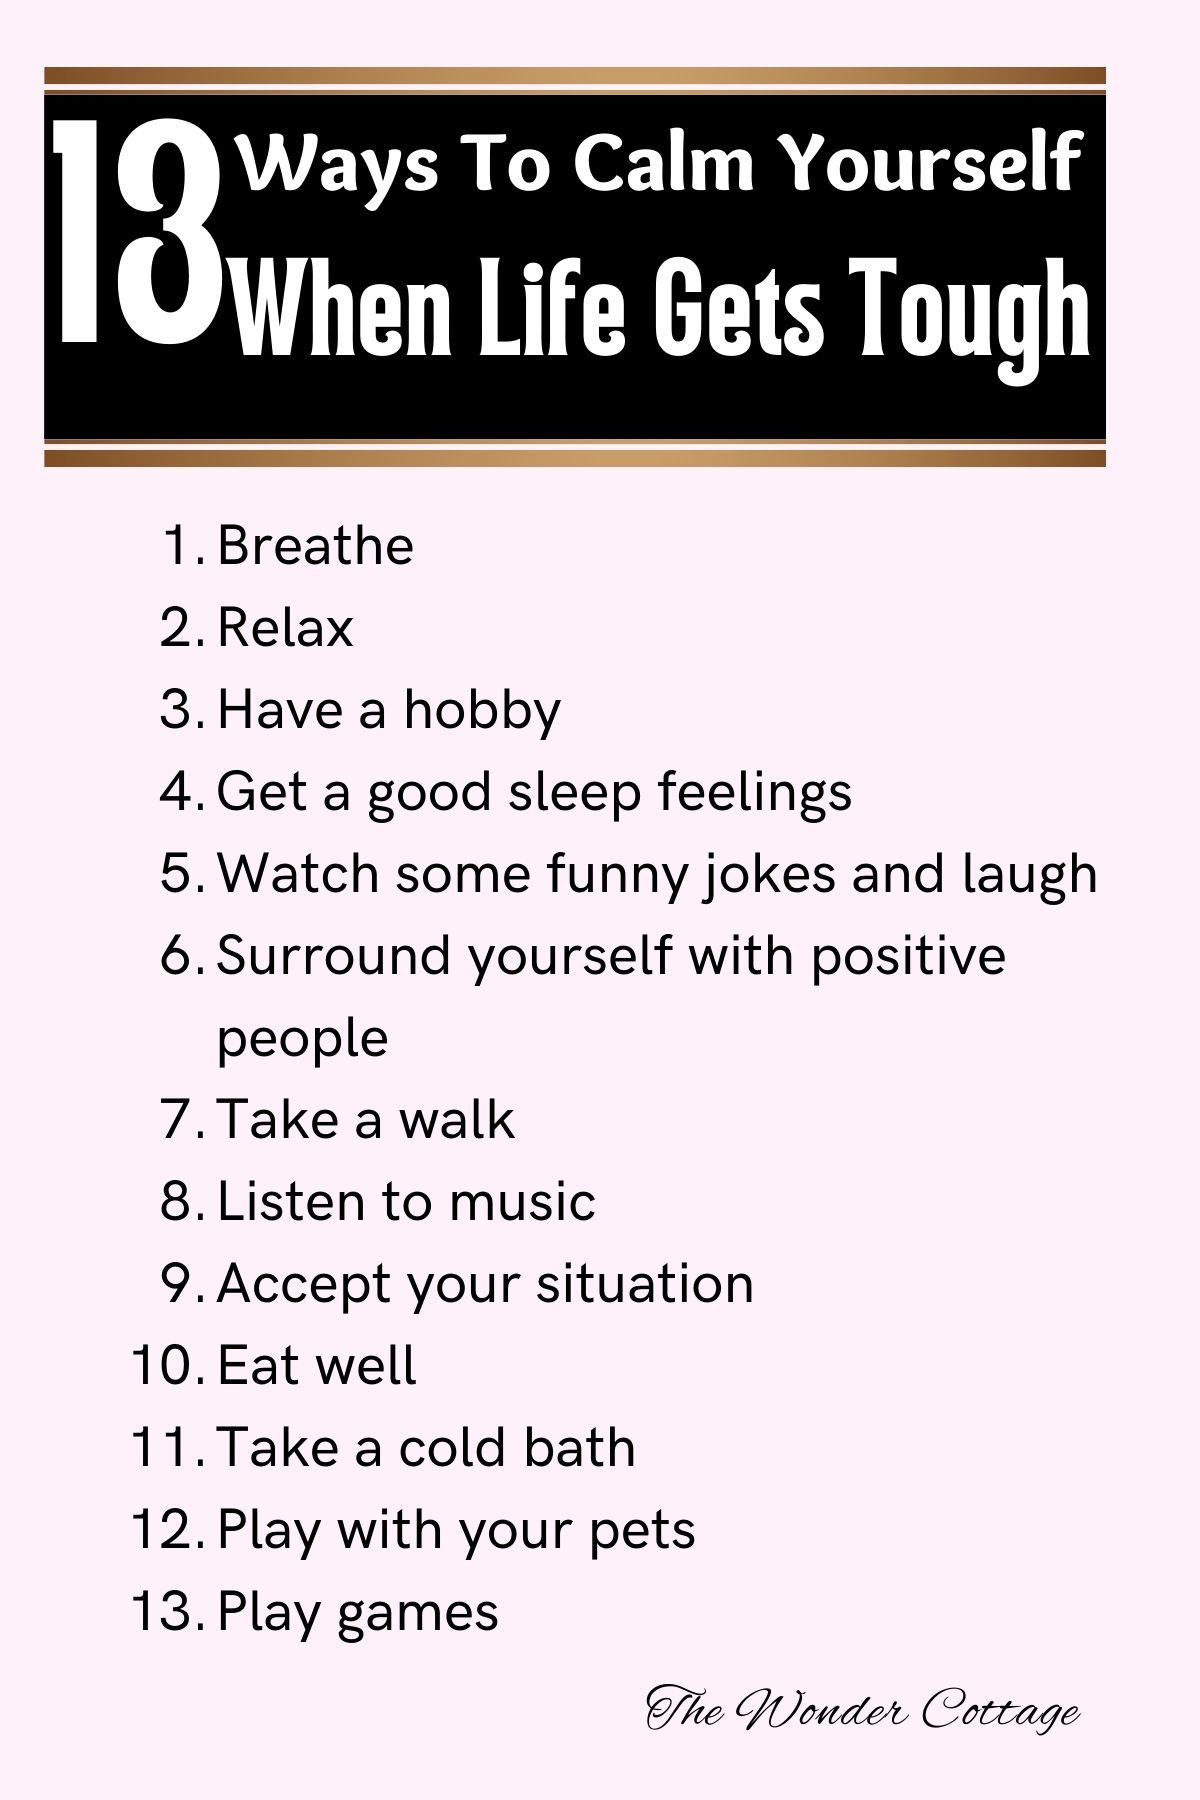 13 Ways To Calm Yourself When Life Gets Tough